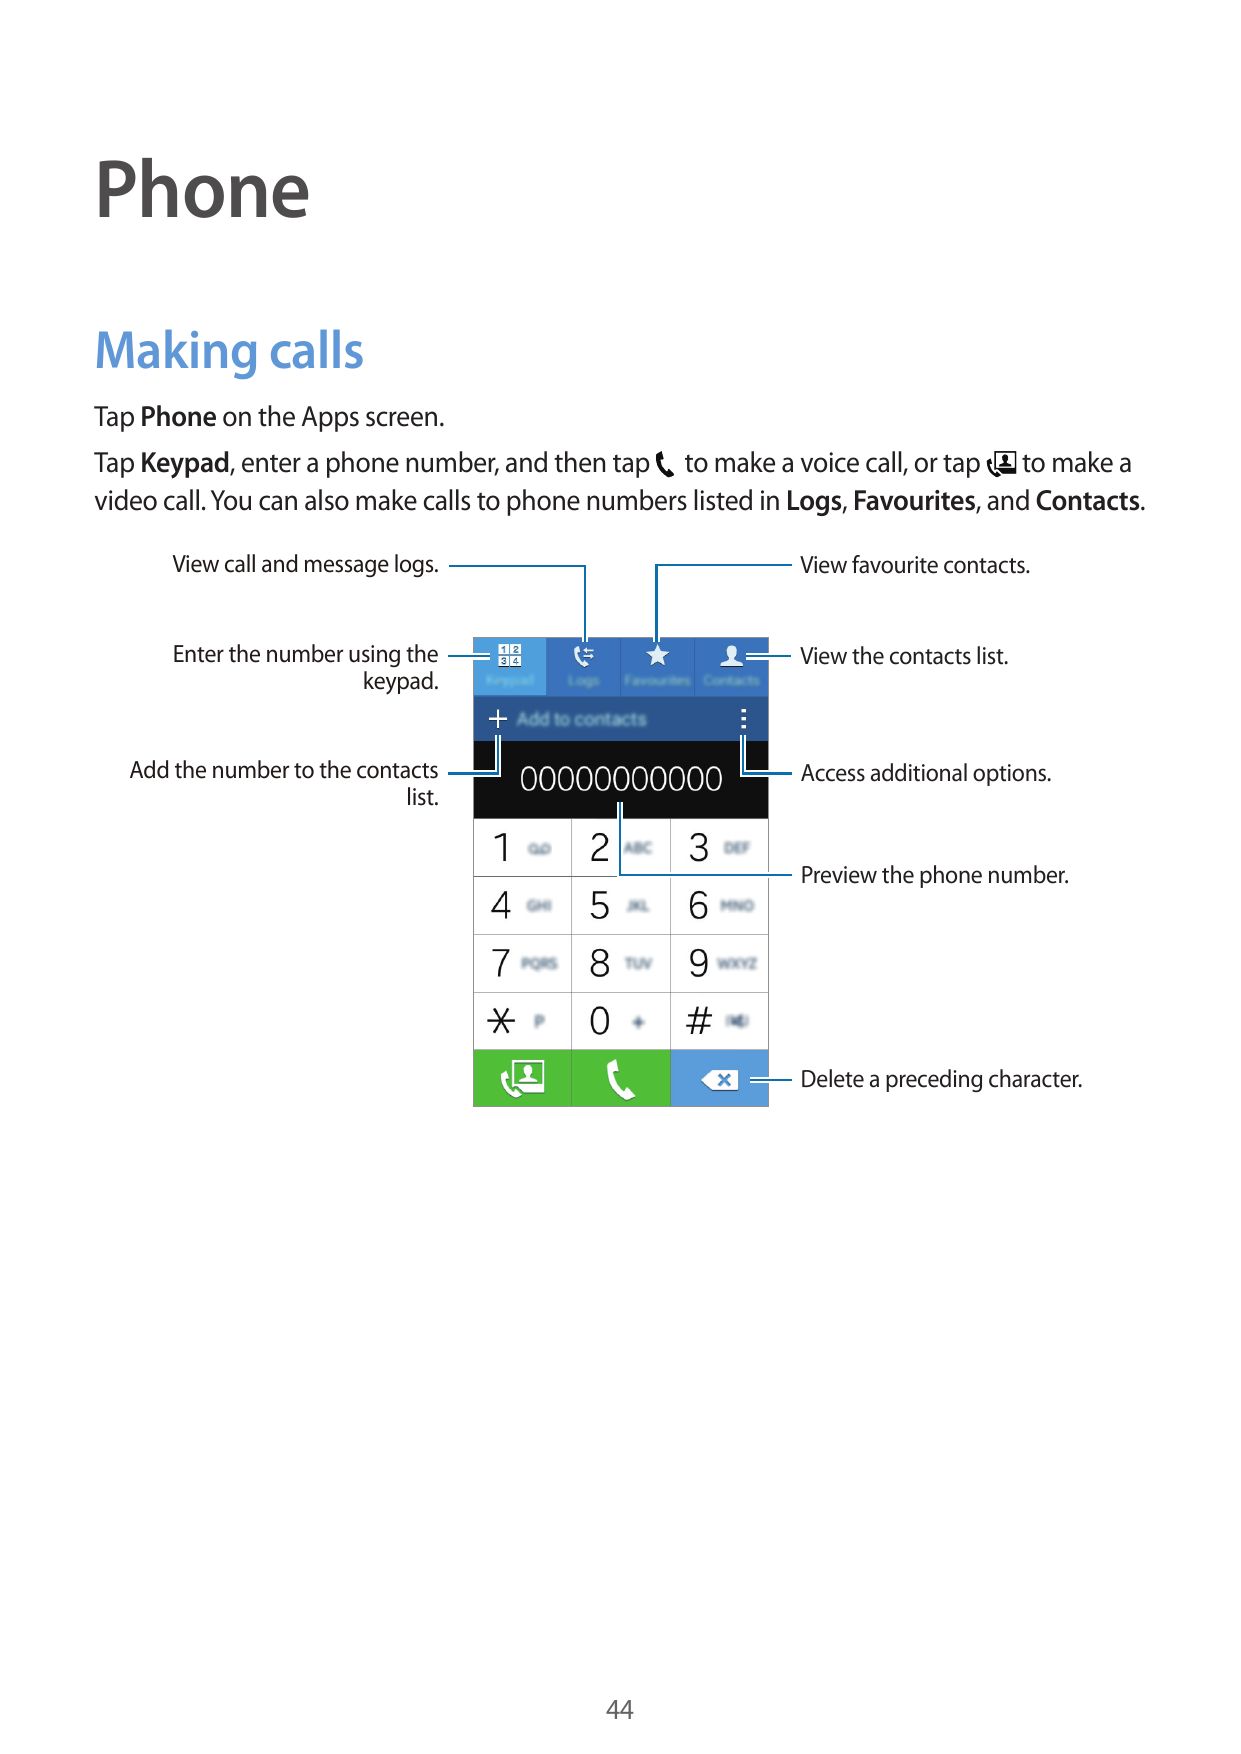 PhoneMaking callsTap Phone on the Apps screen.Tap Keypad, enter a phone number, and then tap to make a voice call, or tap to mak